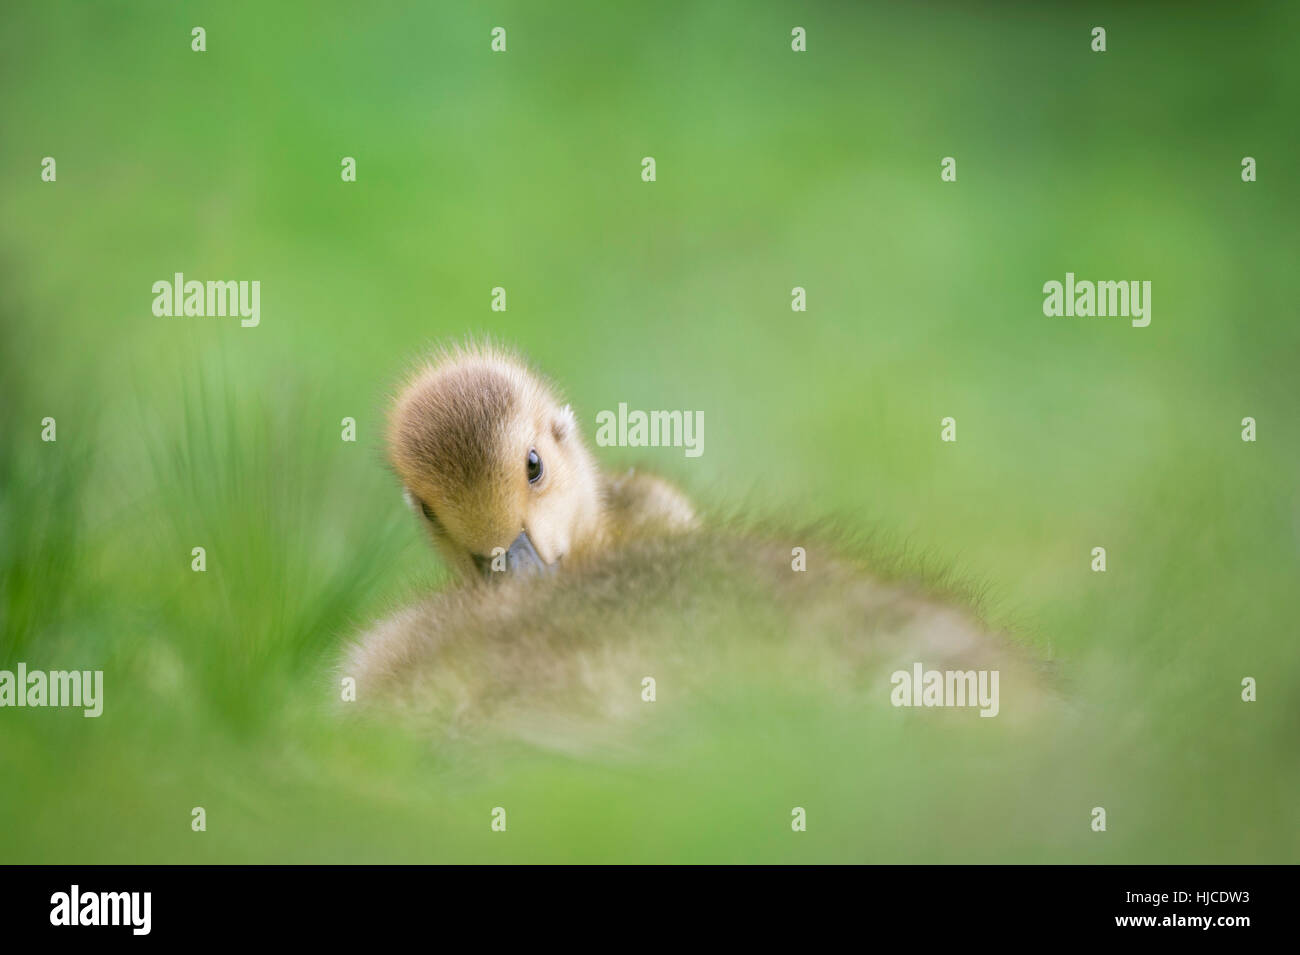 A small gosling tucks its head in while laying in tall green grass. Stock Photo